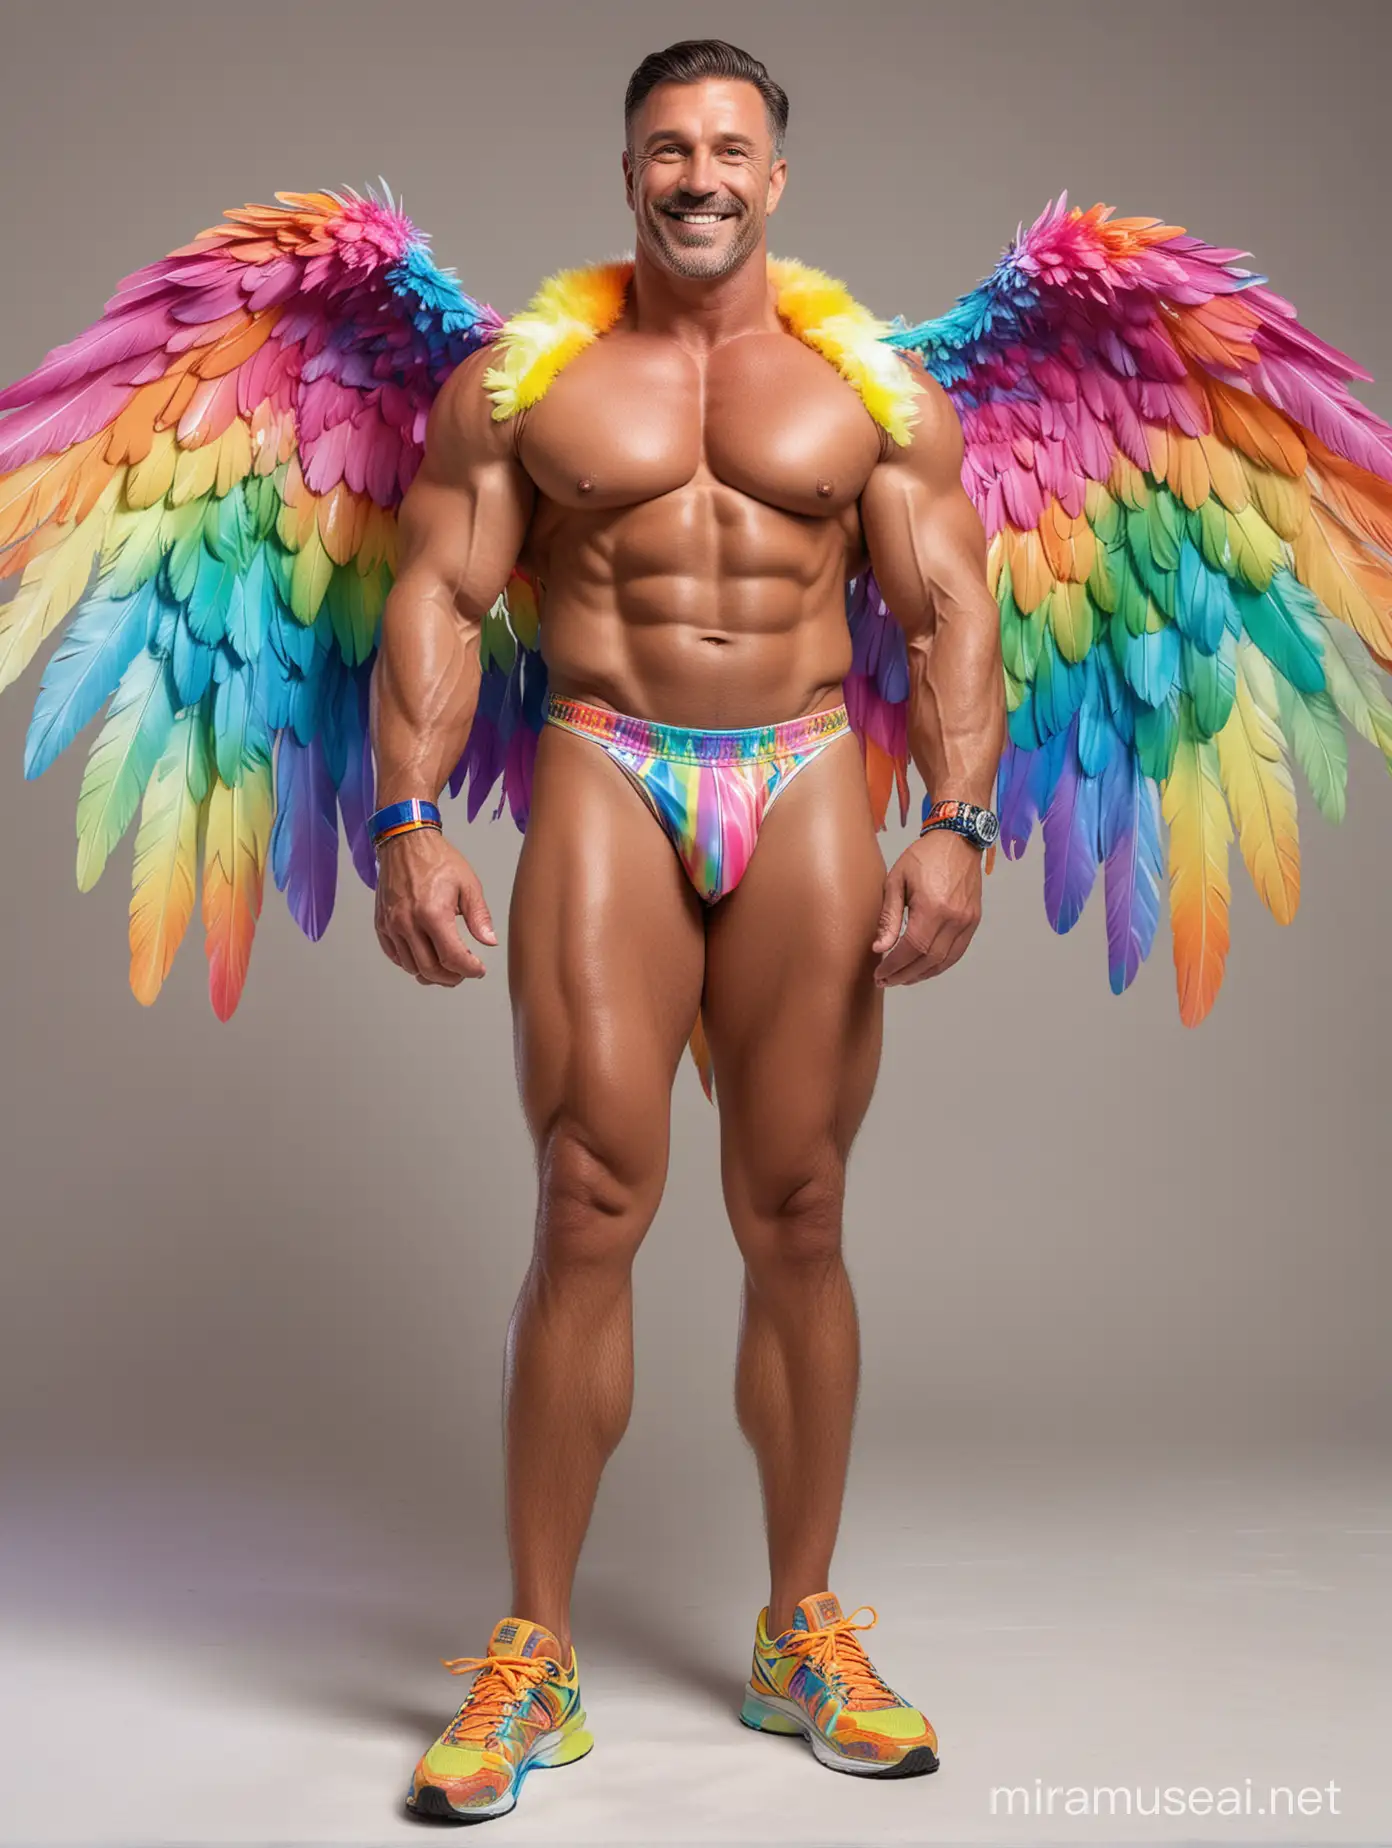 Full Body to feet Topless 40s Ultra Chunky Bodybuilder Daddy with Great Smile wearing Multi-Highlighter Bright Rainbow with white Coloured See Through Huge Eagle Wings Shoulder Jacket Short shorts left arm up Flexing